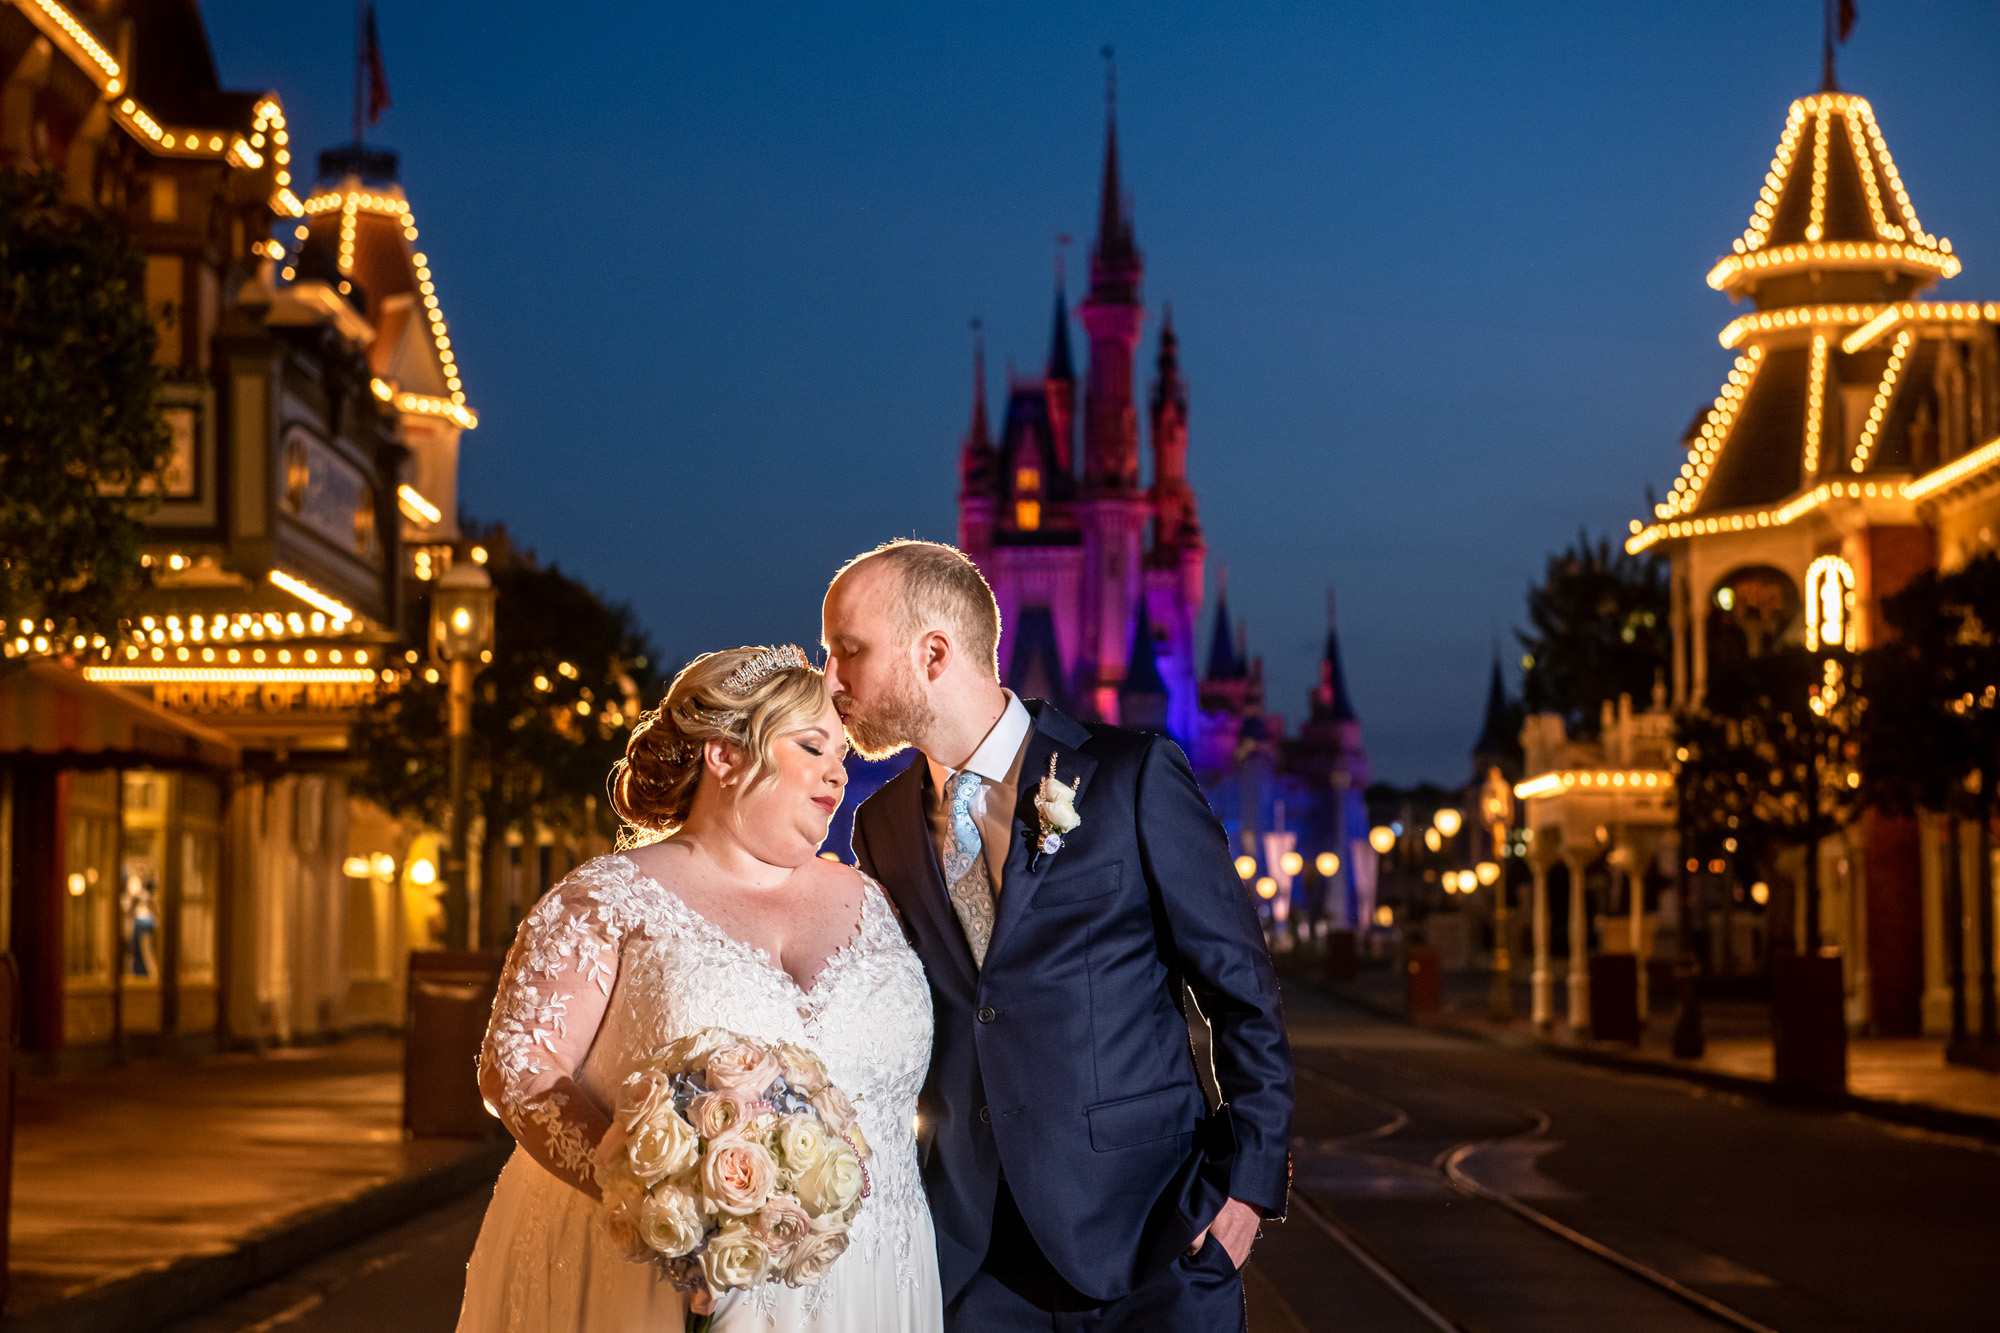 This Disney Wedding Had Some Surprise Guests on the Dance Floor